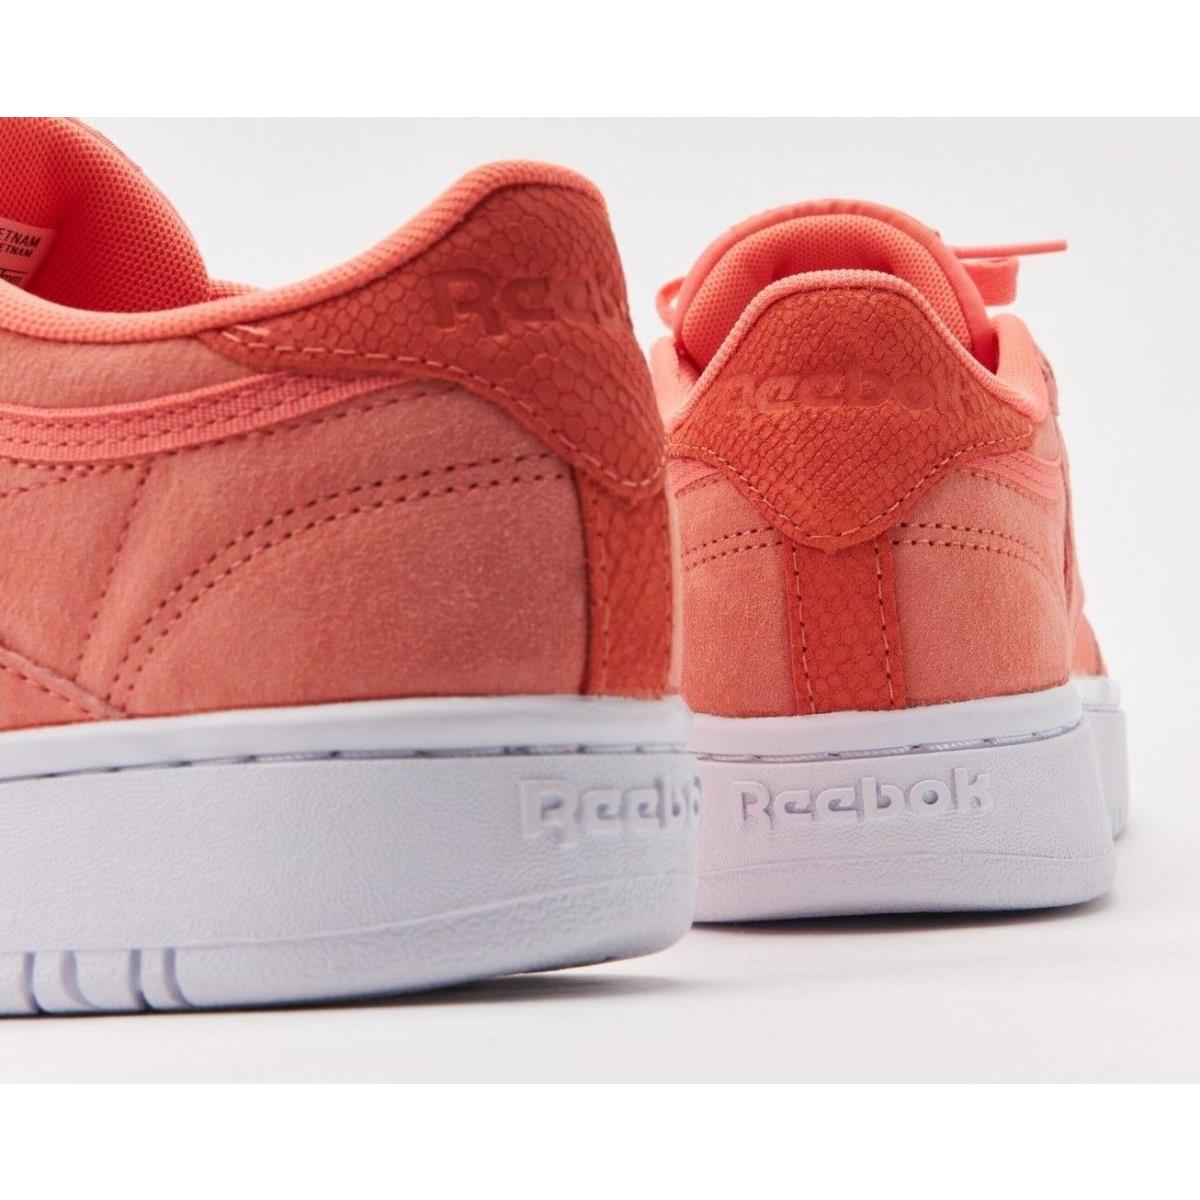 Reebok shoes Club Double - Twisted Coral/White 6